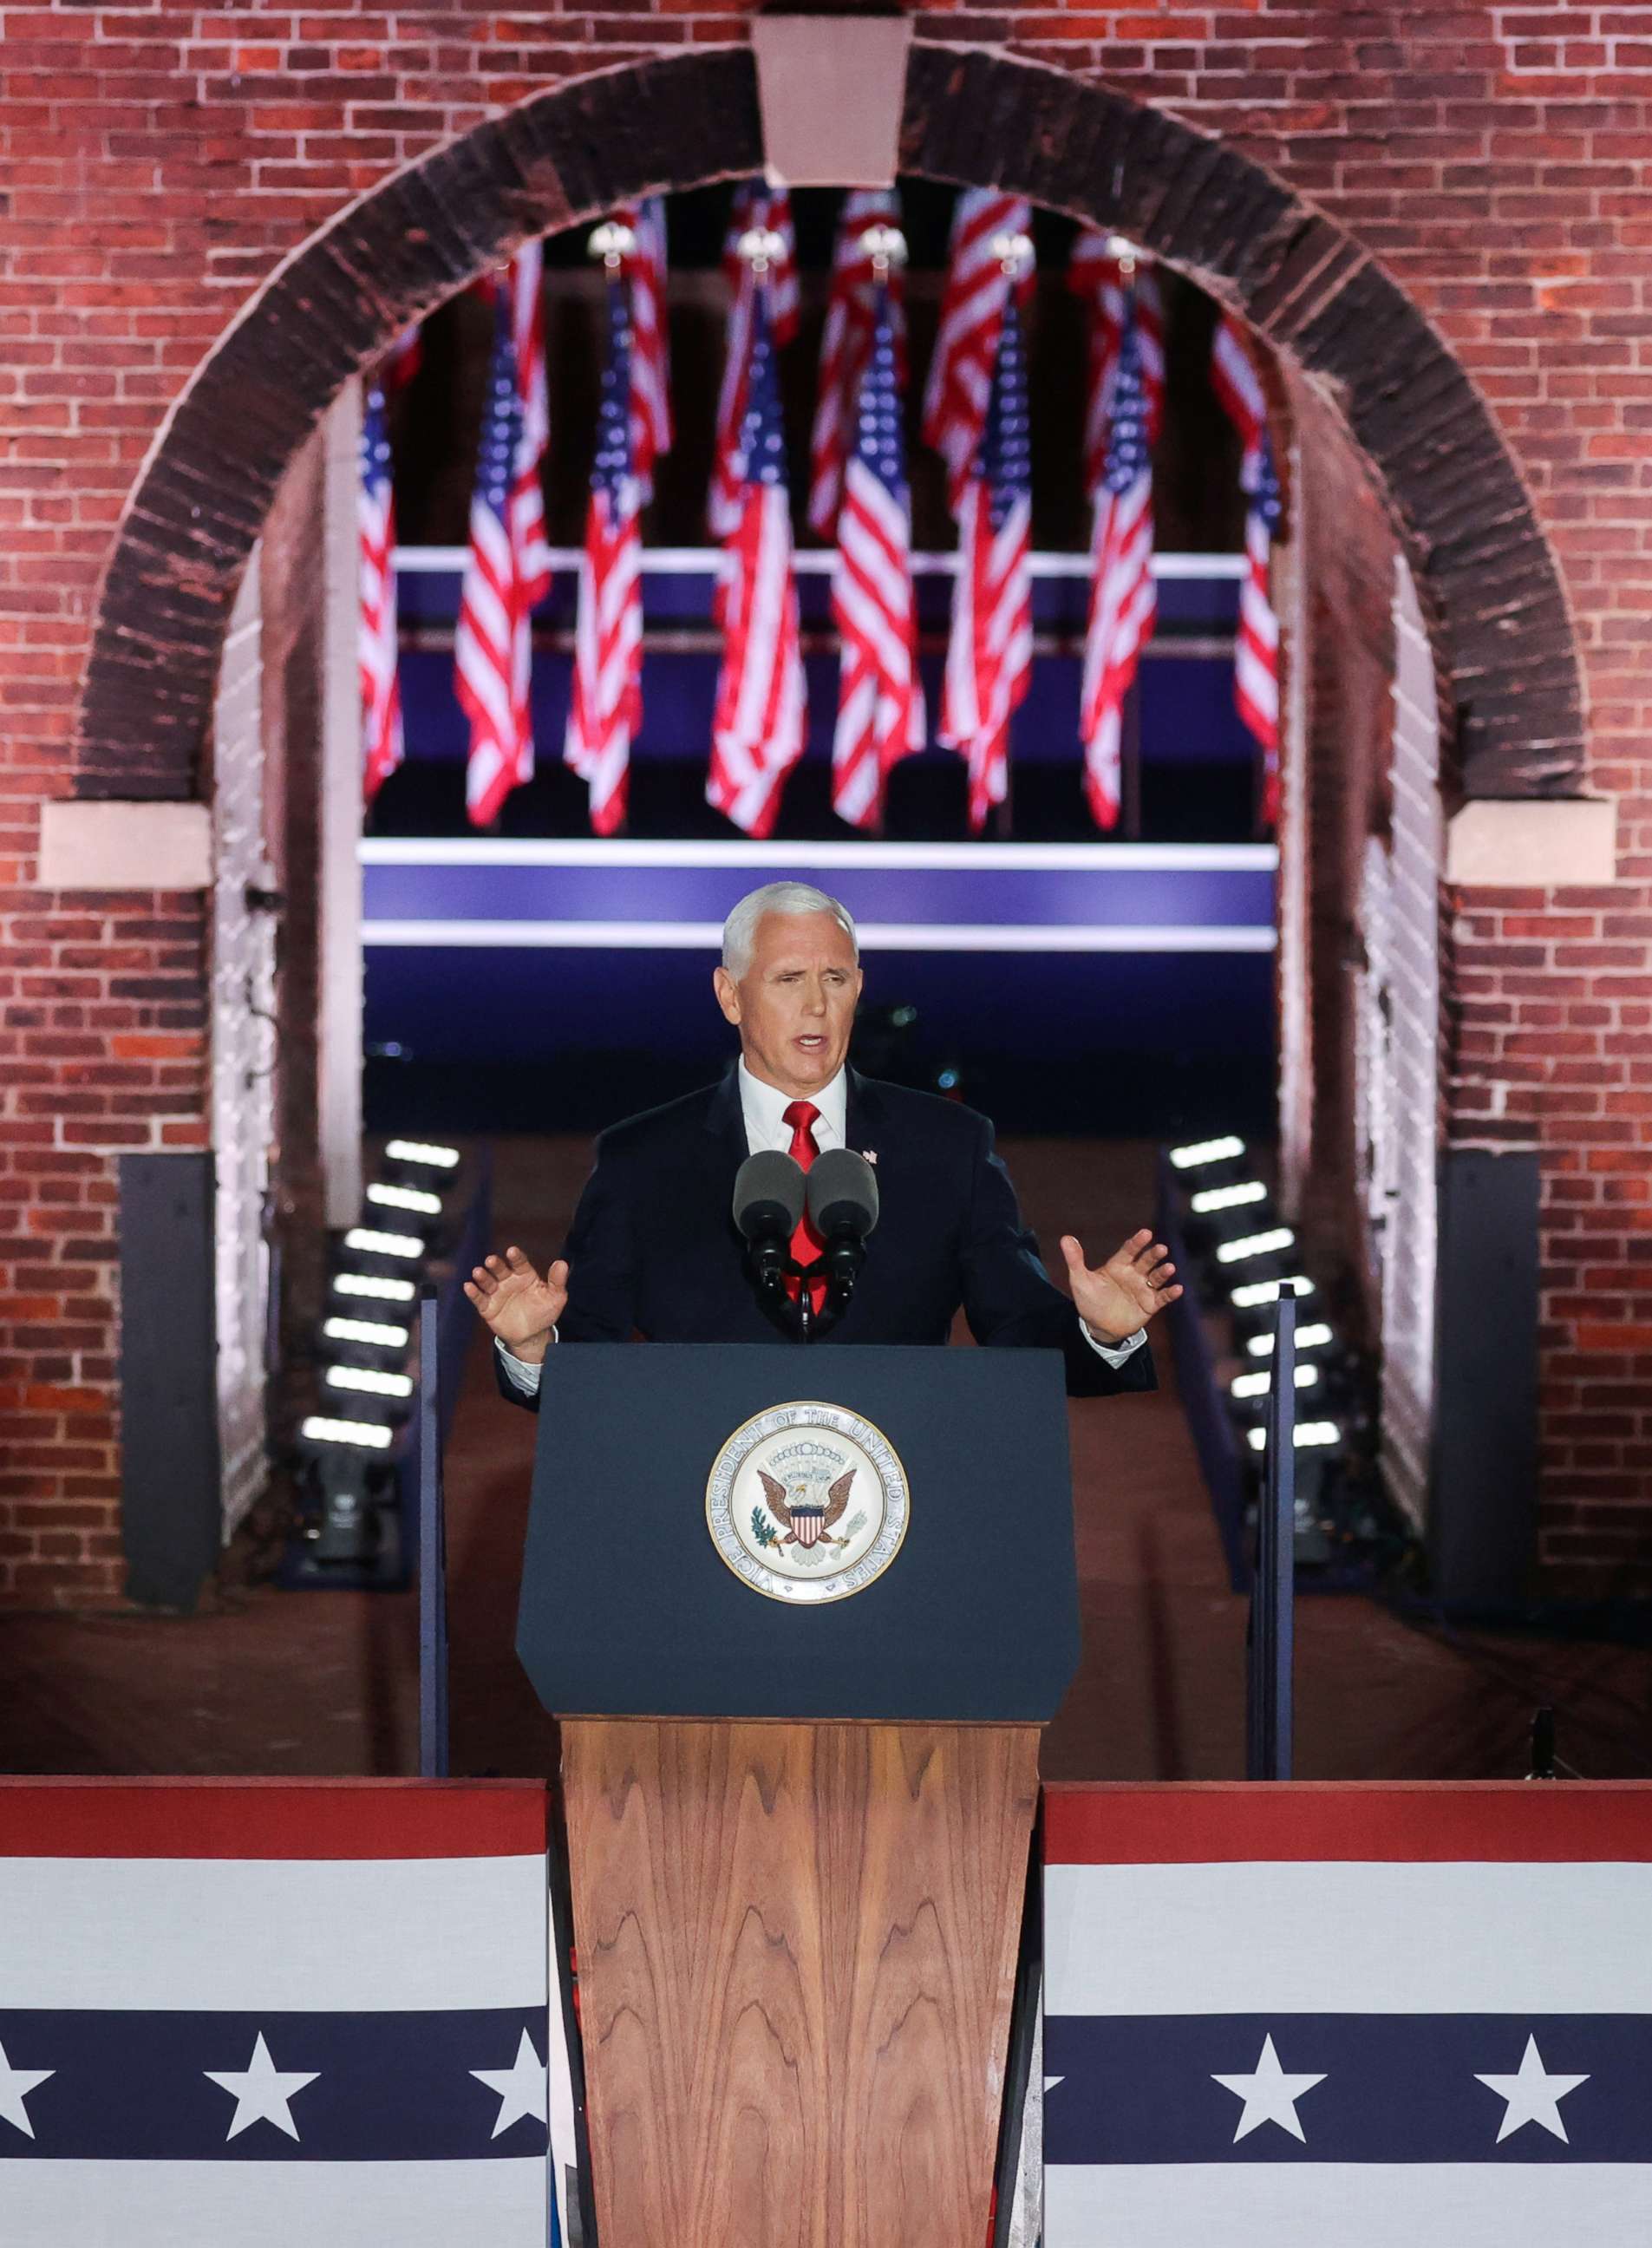 PHOTO: Vice President Mike Pence delivers his acceptance speech during an event of the 2020 Republican National Convention held at Fort McHenry in Baltimore, Aug. 26, 2020.